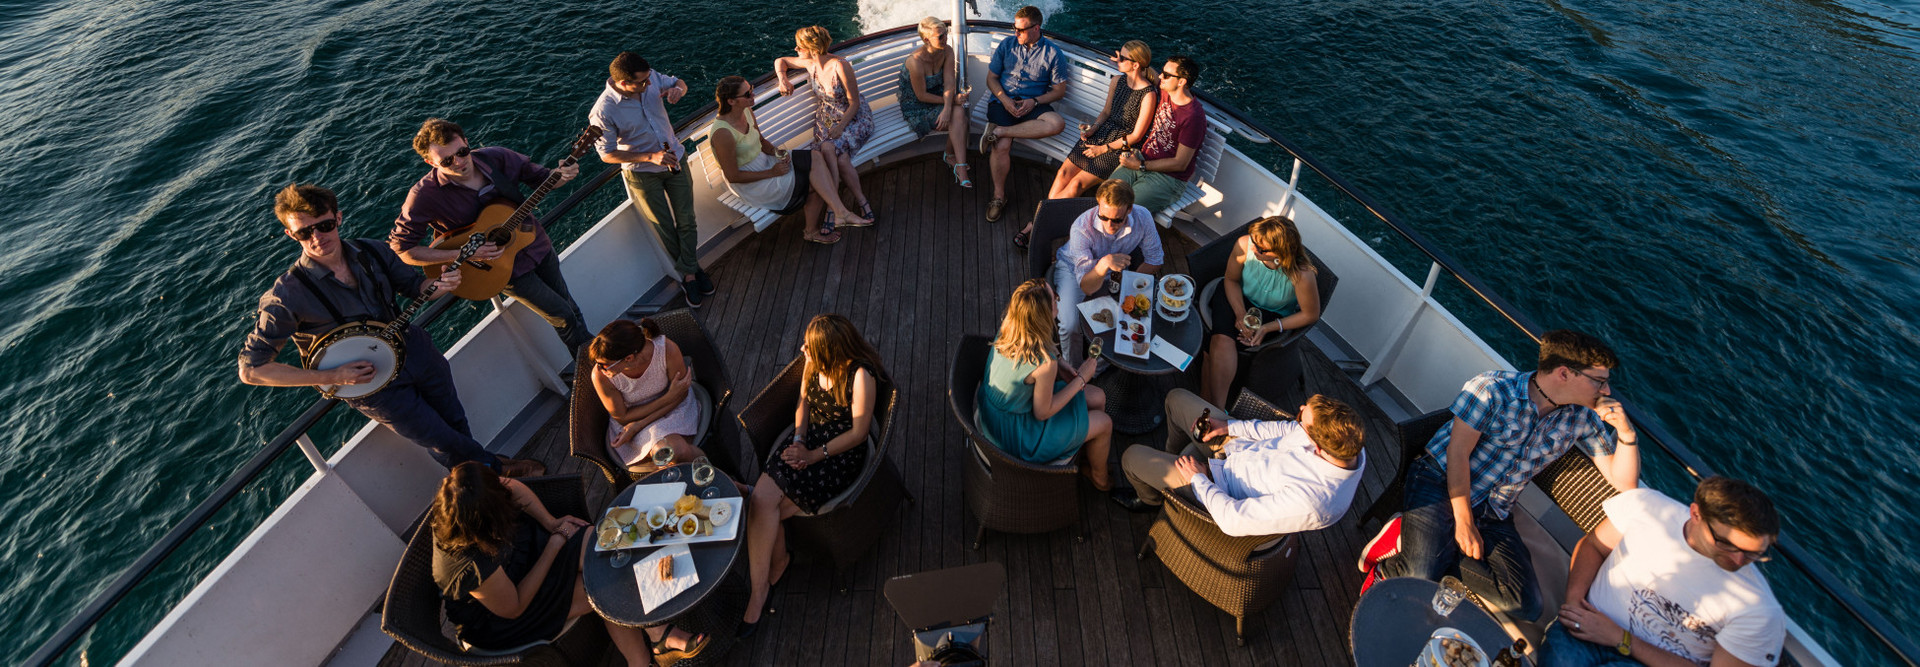 Open-air company aperitif on Lake Lucerne at summer.